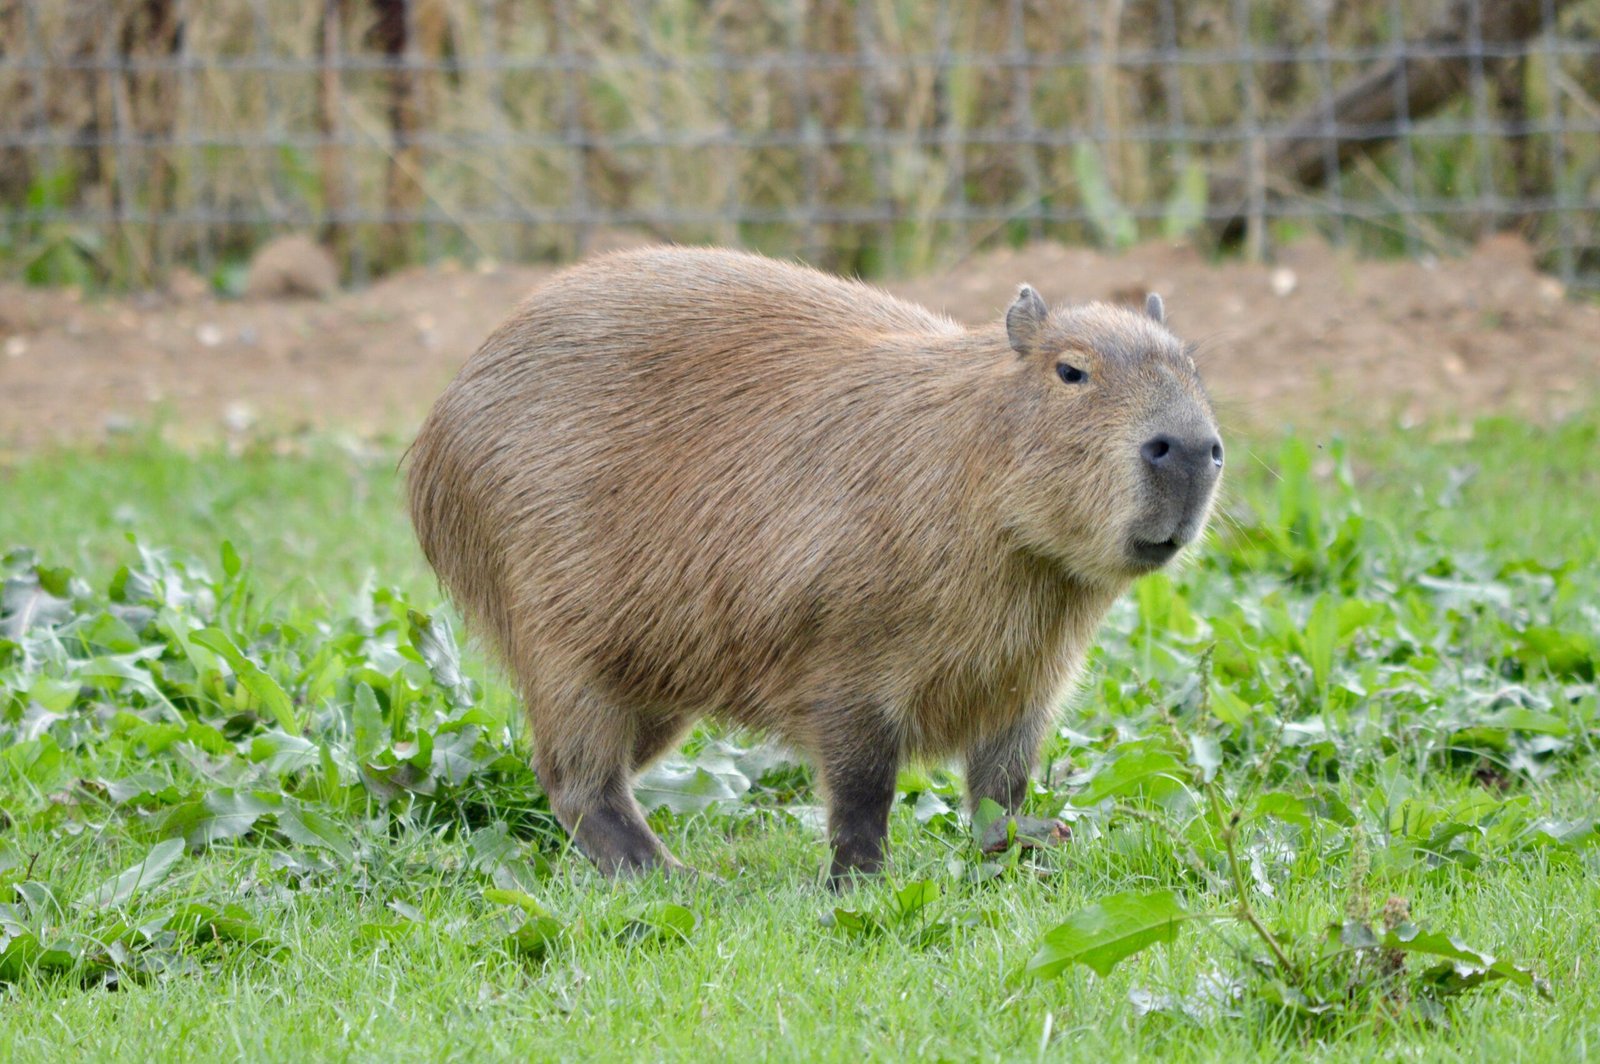 The Diet of Capybaras in the Amazon Rainforest